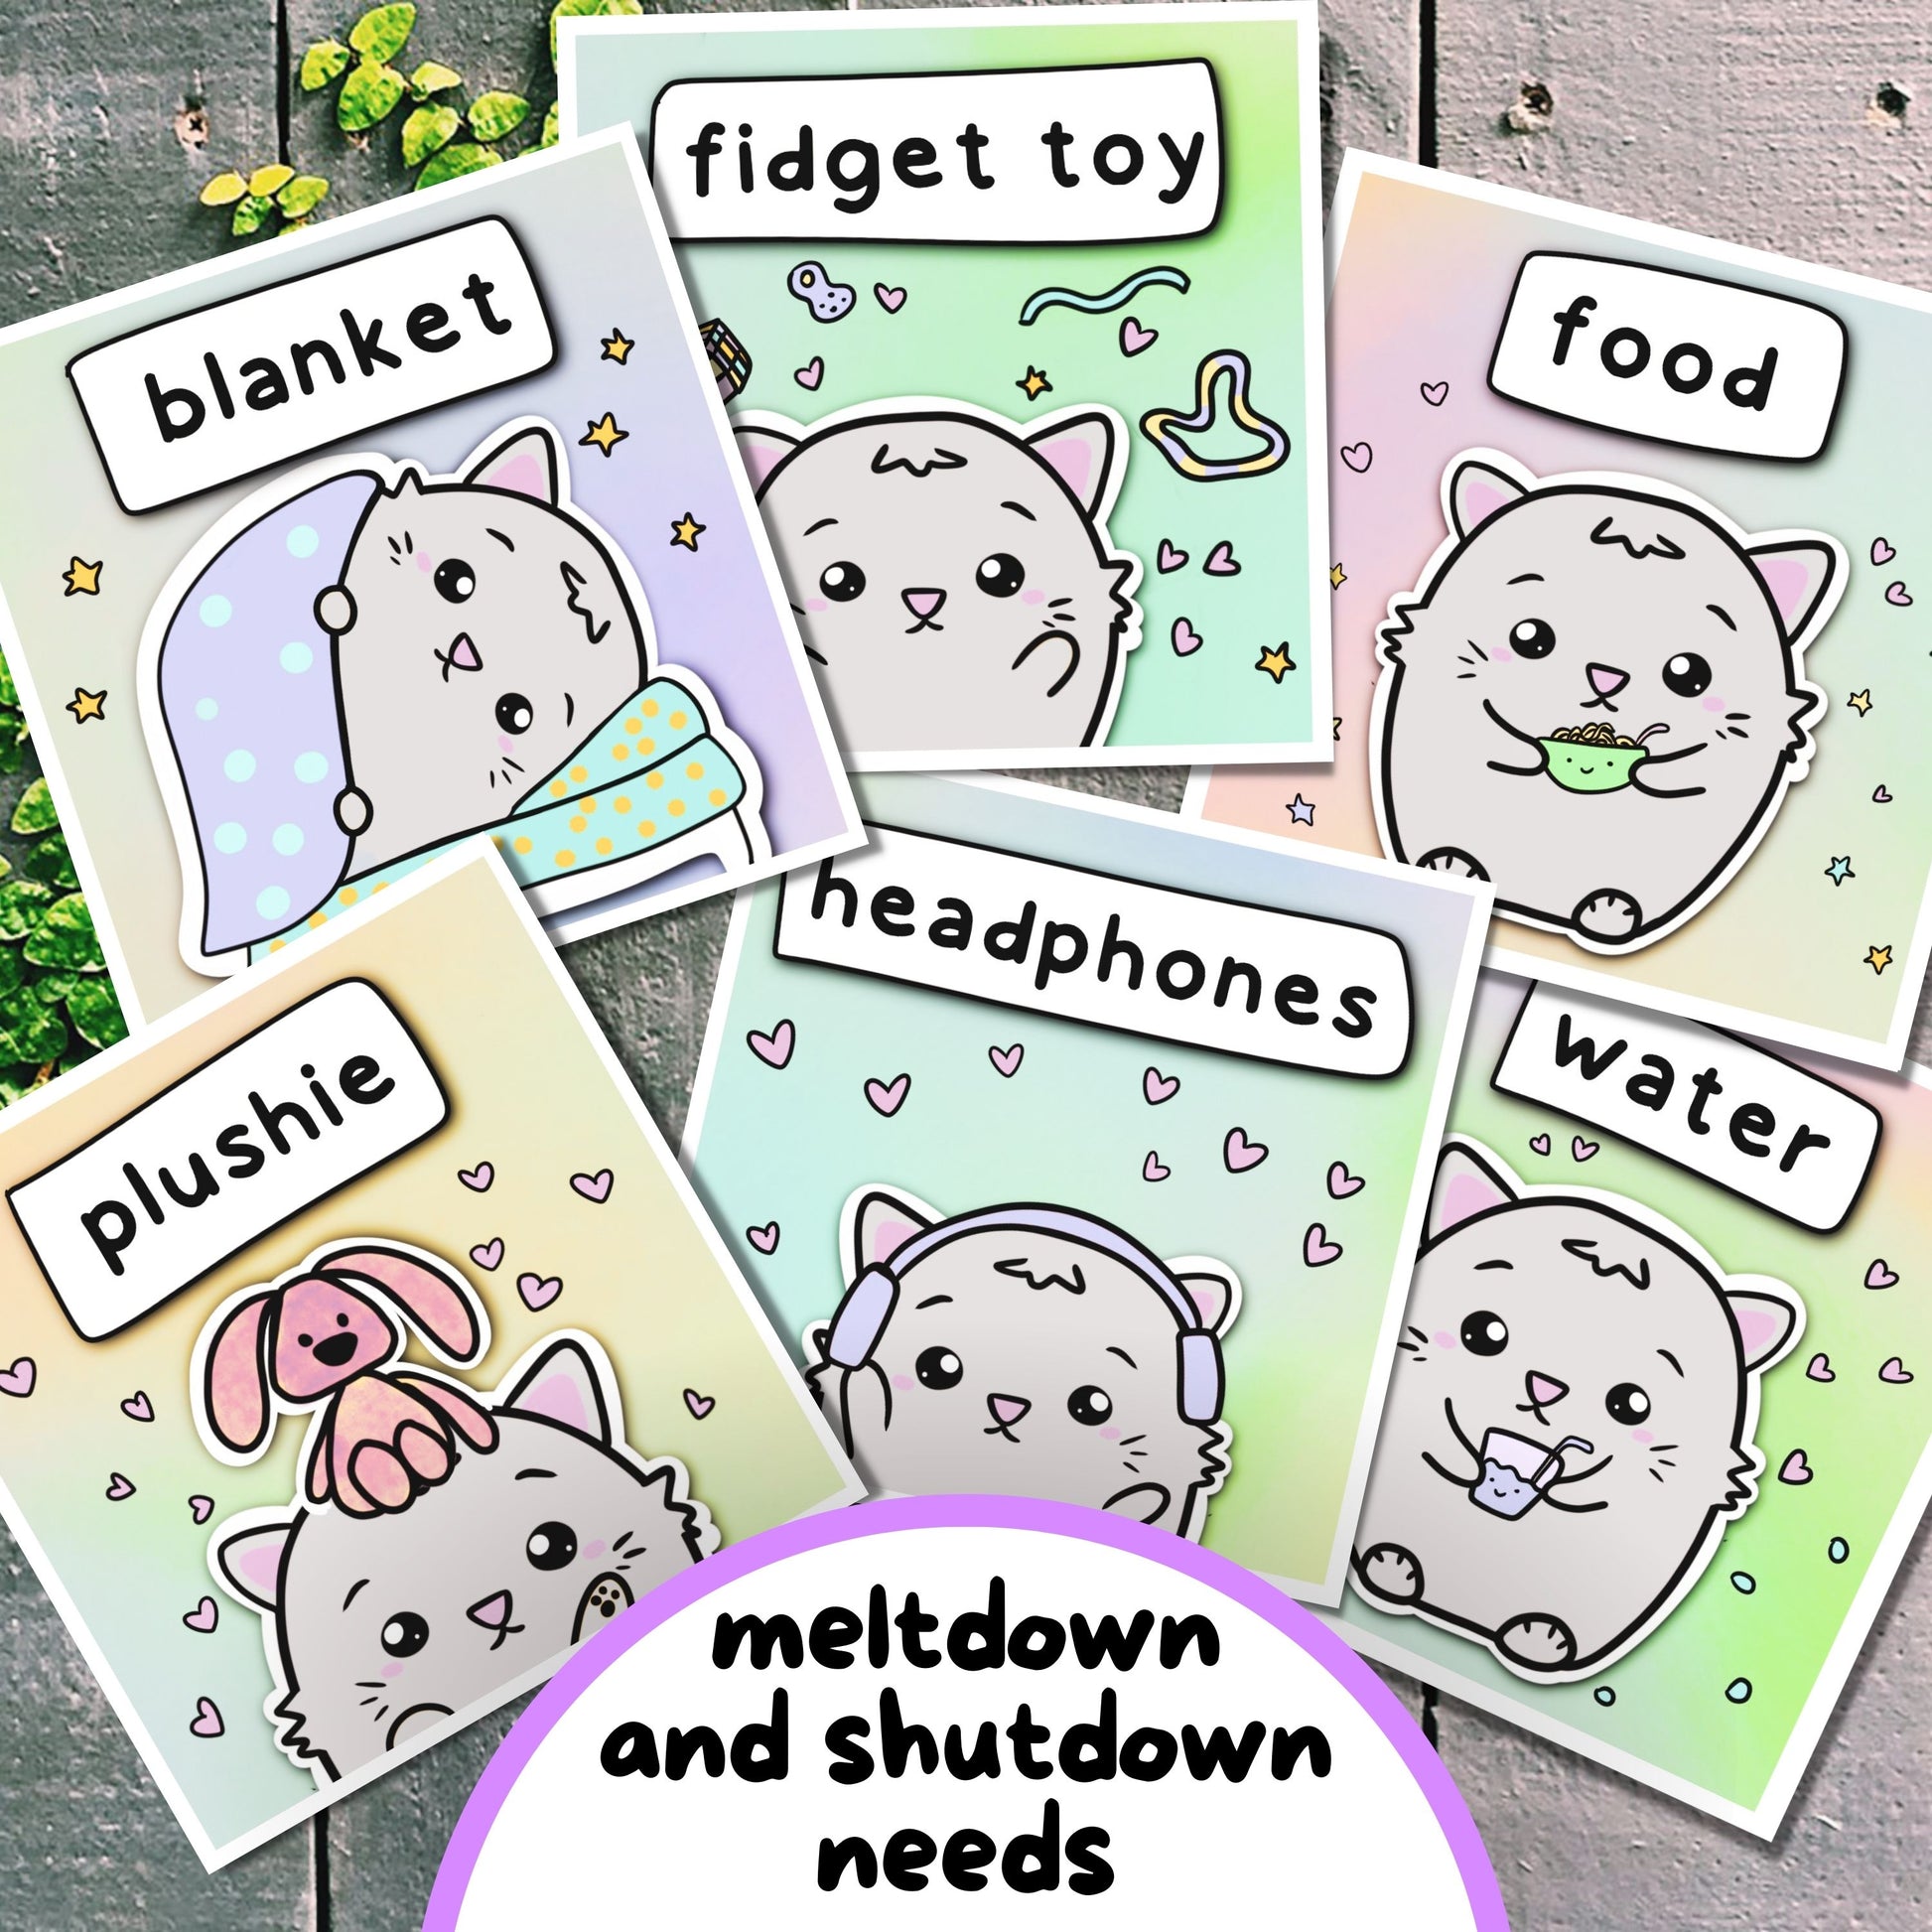 Cat-Design COmmunication Cards and Affirmation Cards, Hidden Disability Cards, for people with Selective Mutism, Autism, ADHD, Anxety. The set includes communication cards for autistic meltdowns and shutdowns as well. Hand-drawn by an autistic artist (LiL Penguin Studios)